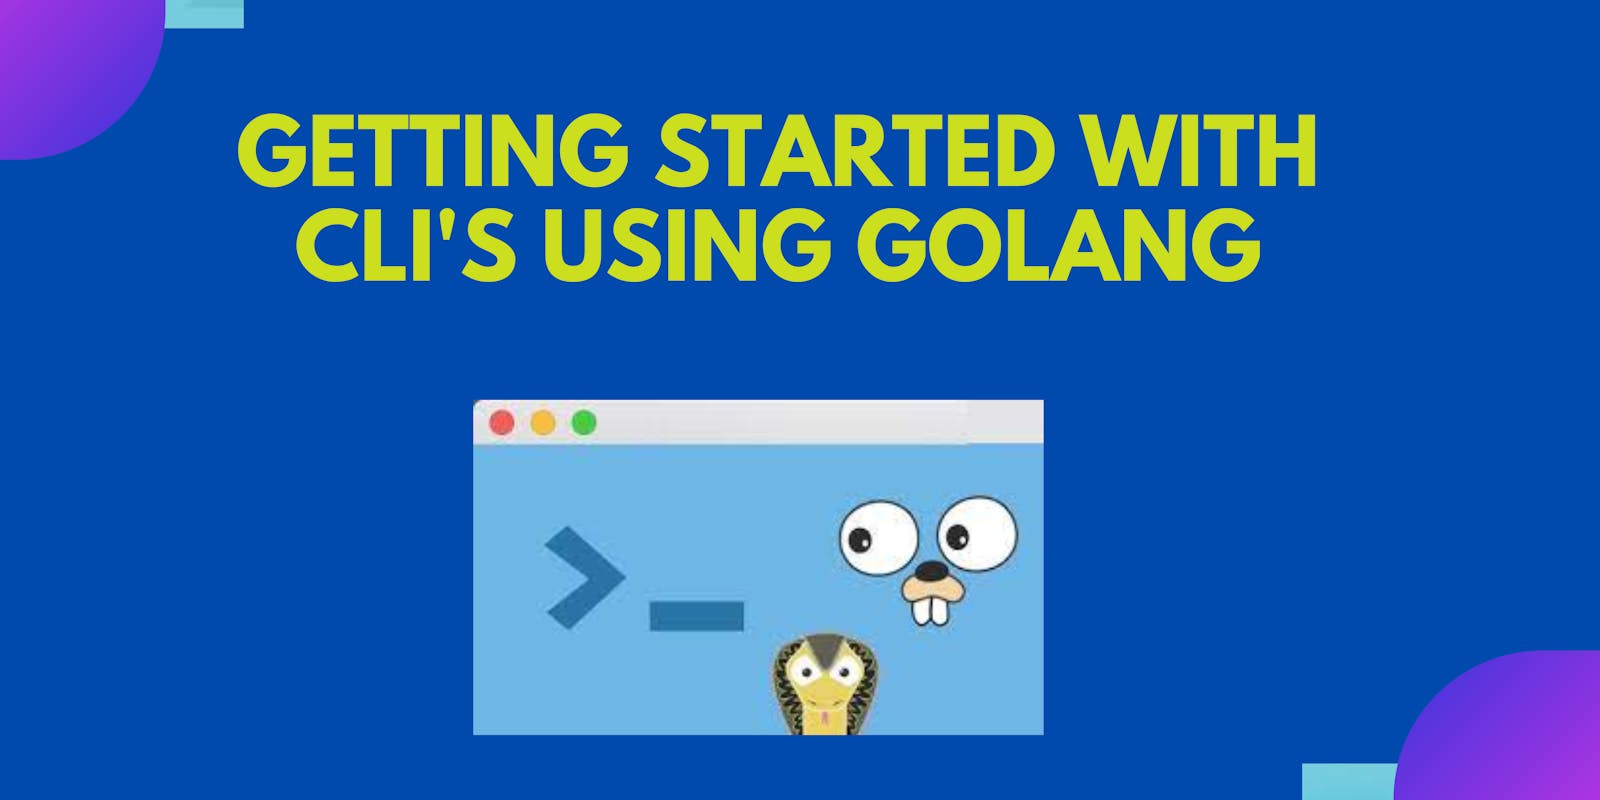 Getting started with CLI's using Golang.